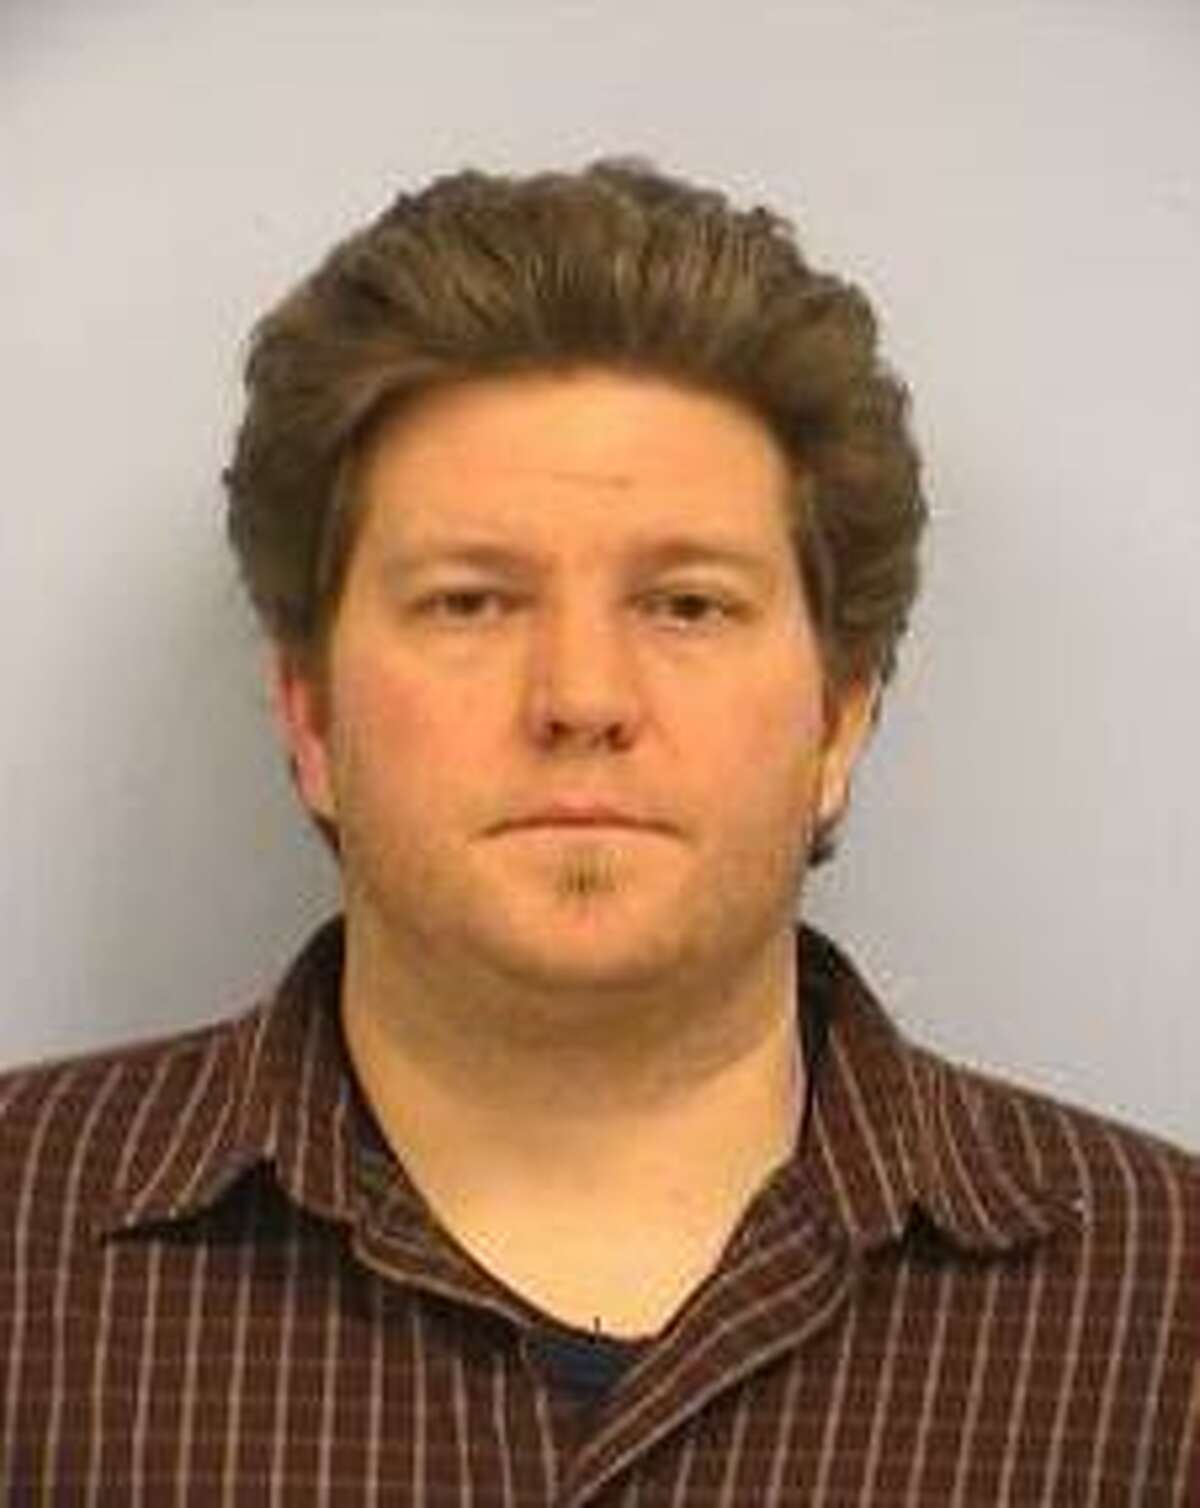 Dustin Lee Whittlesey, 34, was charged with two second-degree felony charges of indecency with a child, according to the Cedar Park Police Department.